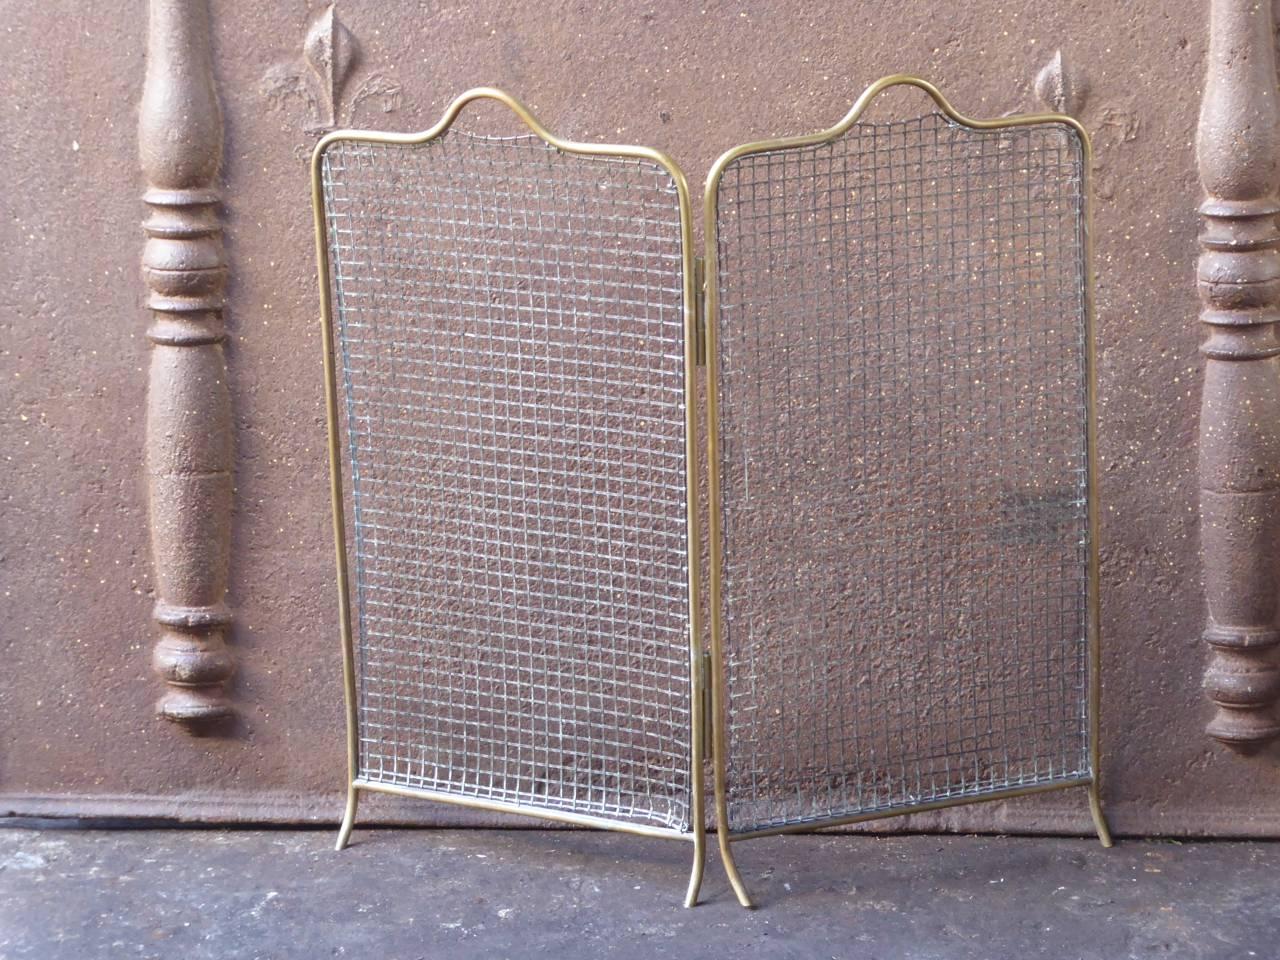 19th century English Victorian fireplace screen made of brass and iron mesh. The screen has two panels.

We have a unique and specialized collection of antique and used fireplace accessories consisting of more than 1000 listings at 1stdibs. Amongst